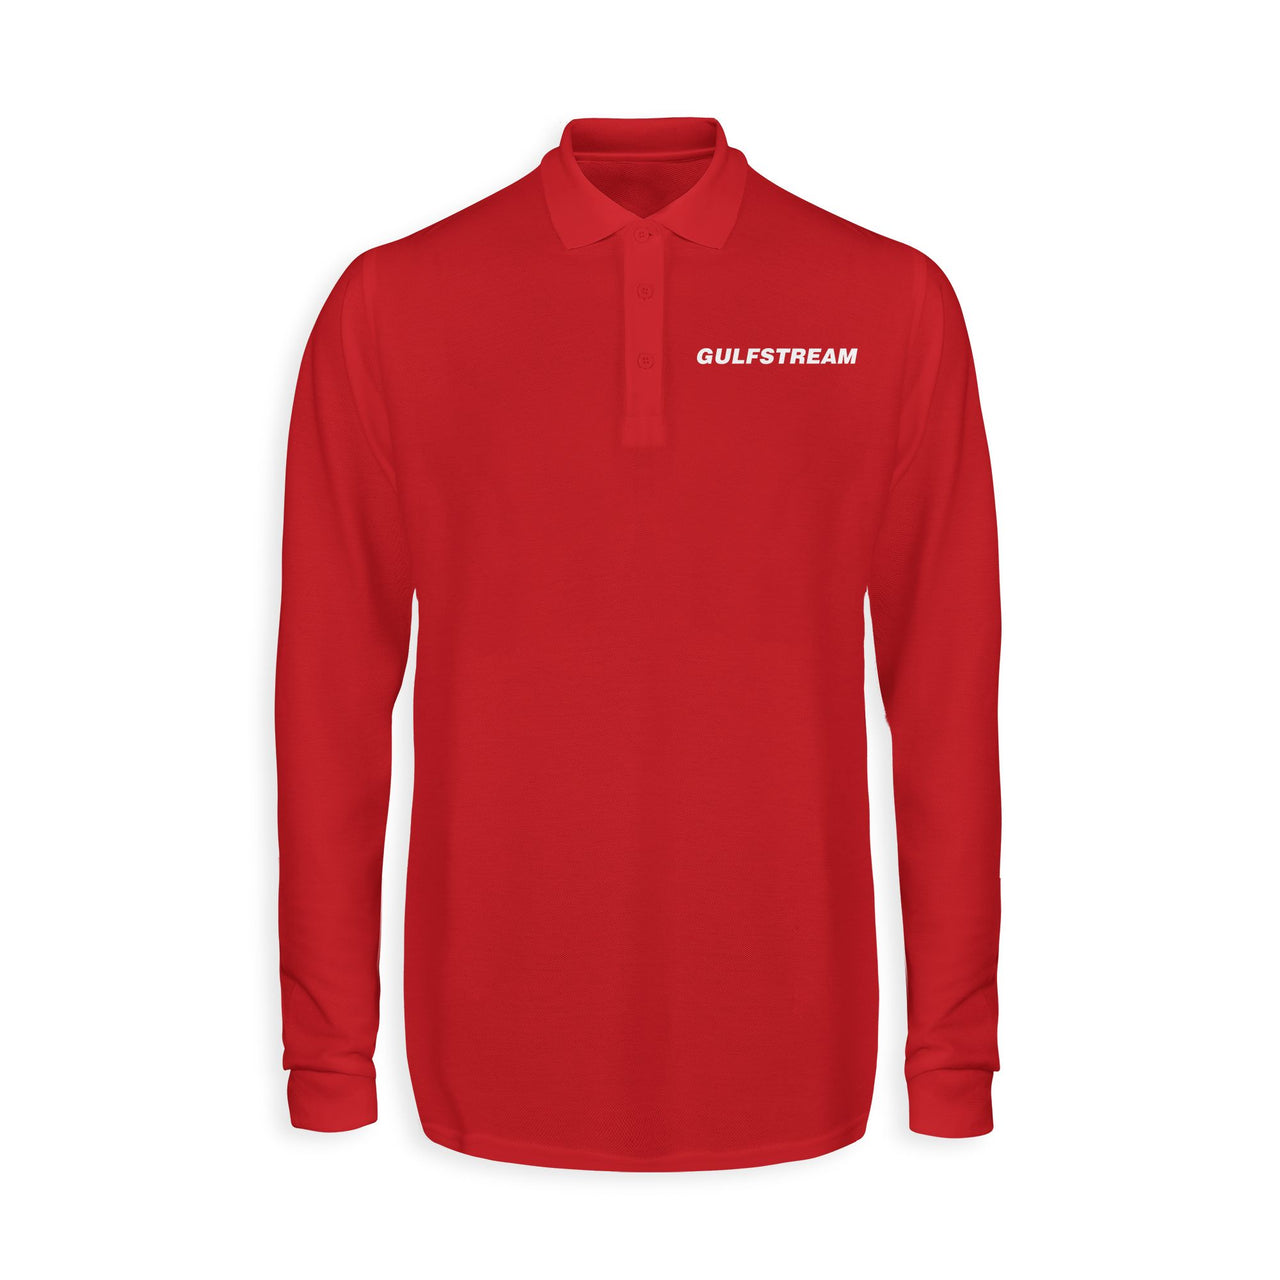 Gulfstream & Text Designed Long Sleeve Polo T-Shirts